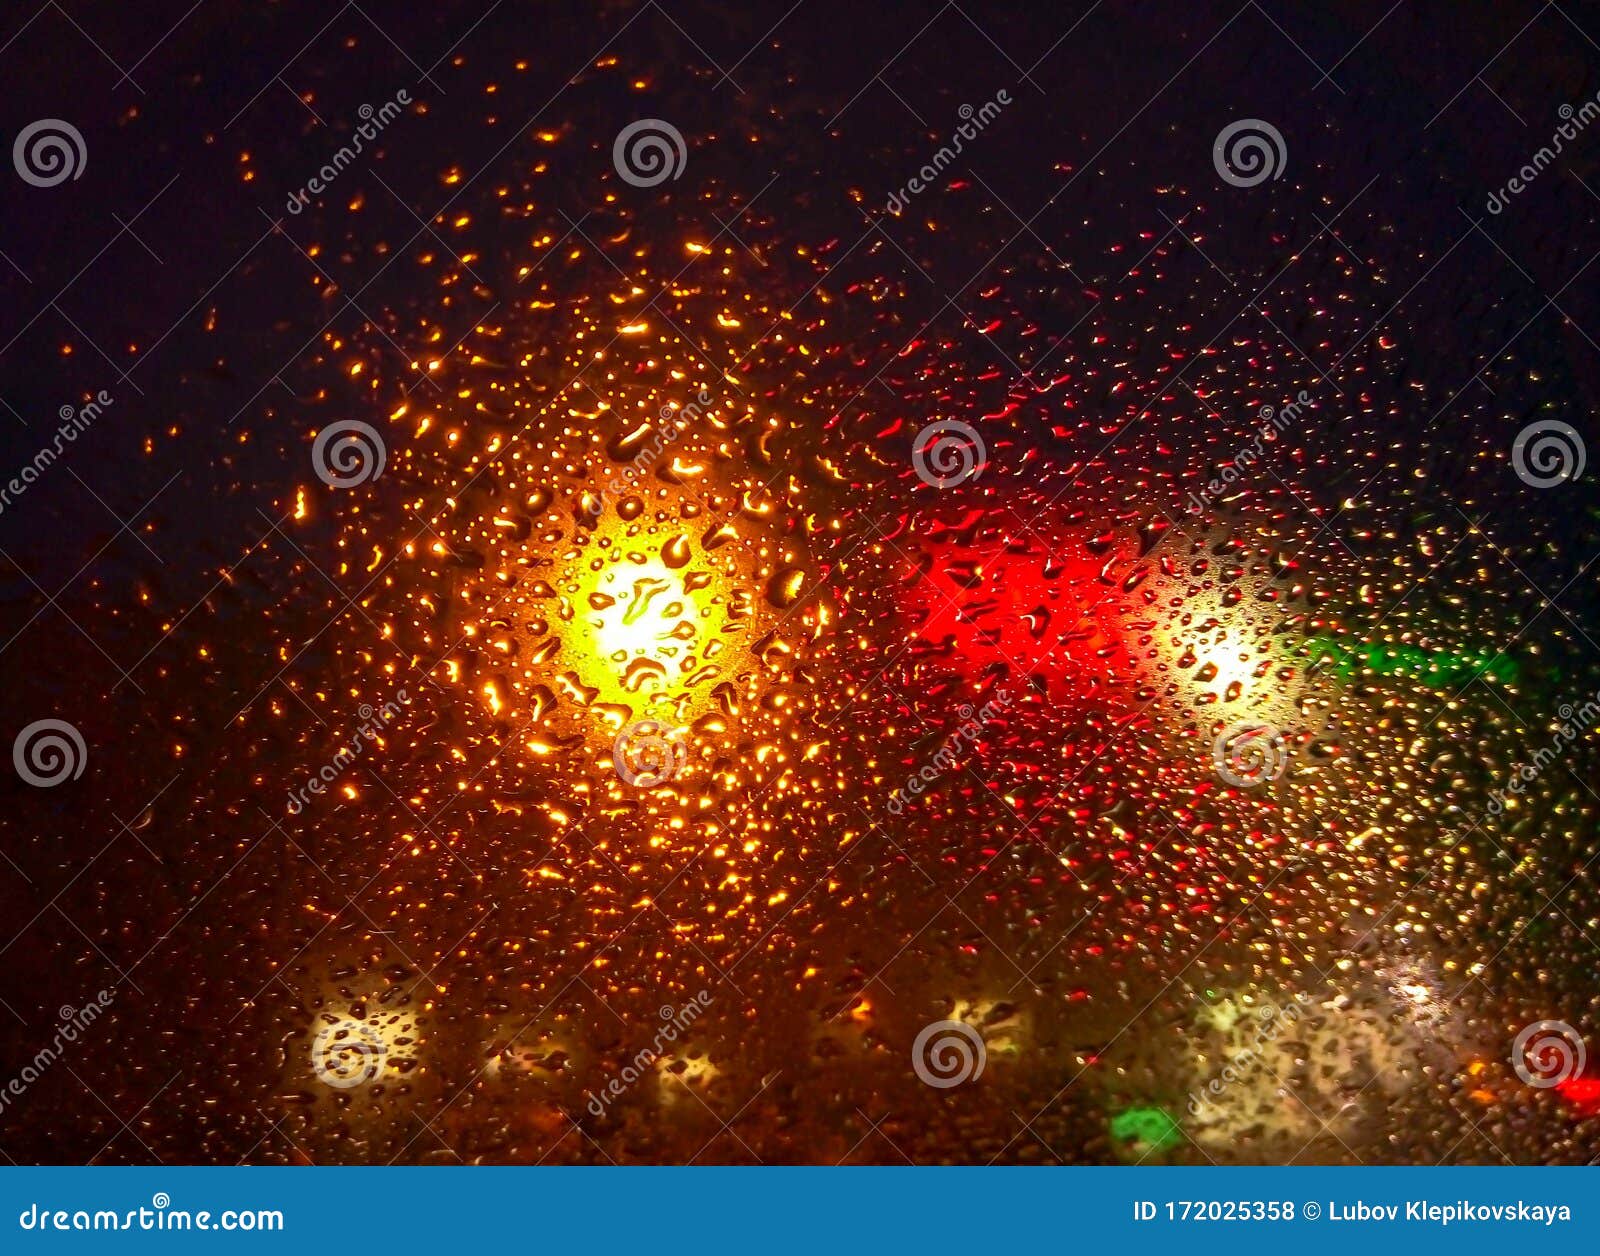 Rain Drops On Window With Road Light Bokehwater Drop On The Glass